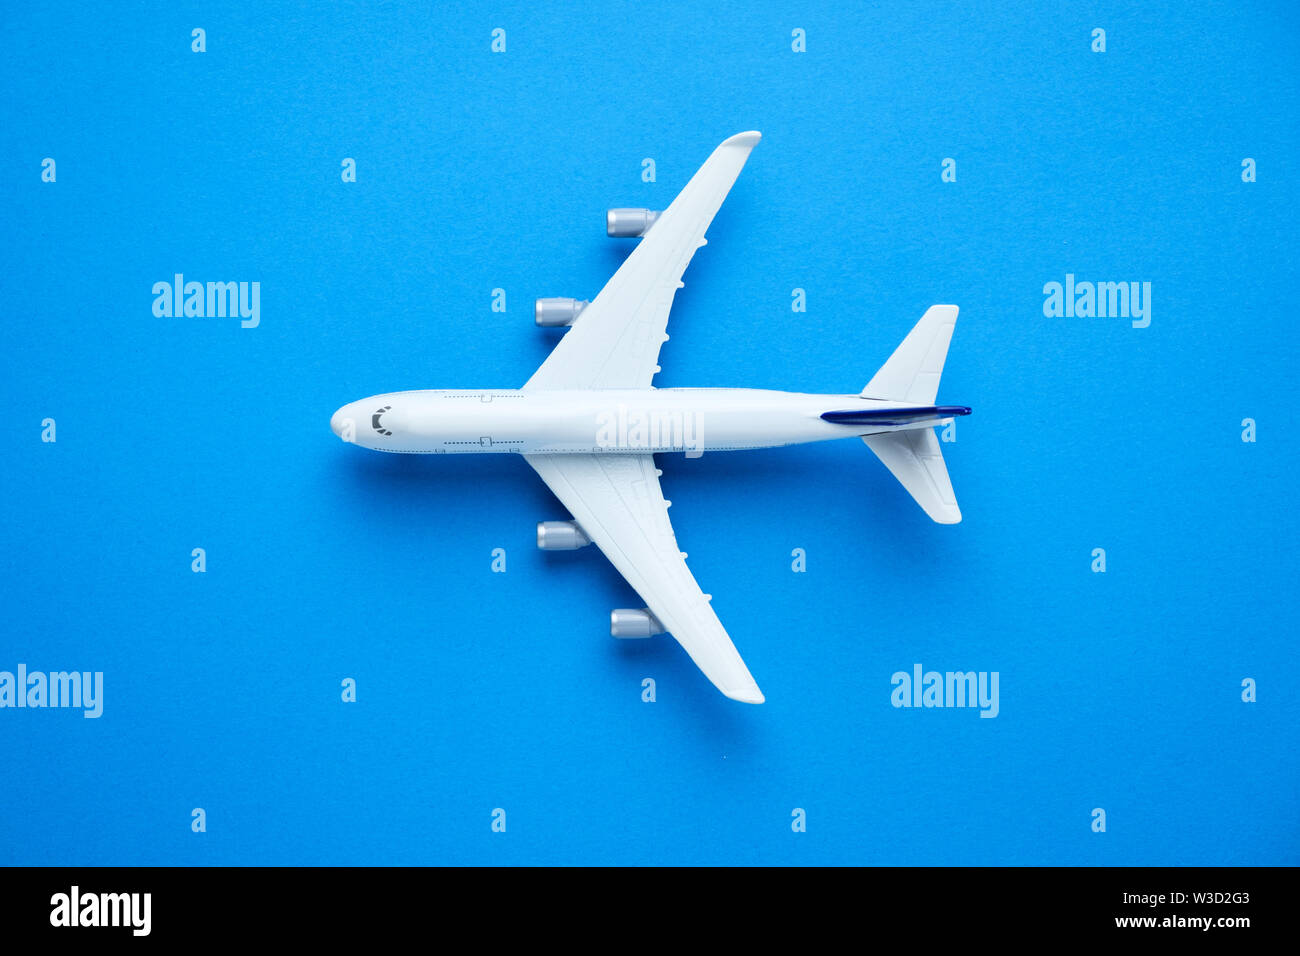 Model airplane on blue pastel color background Stock Photo